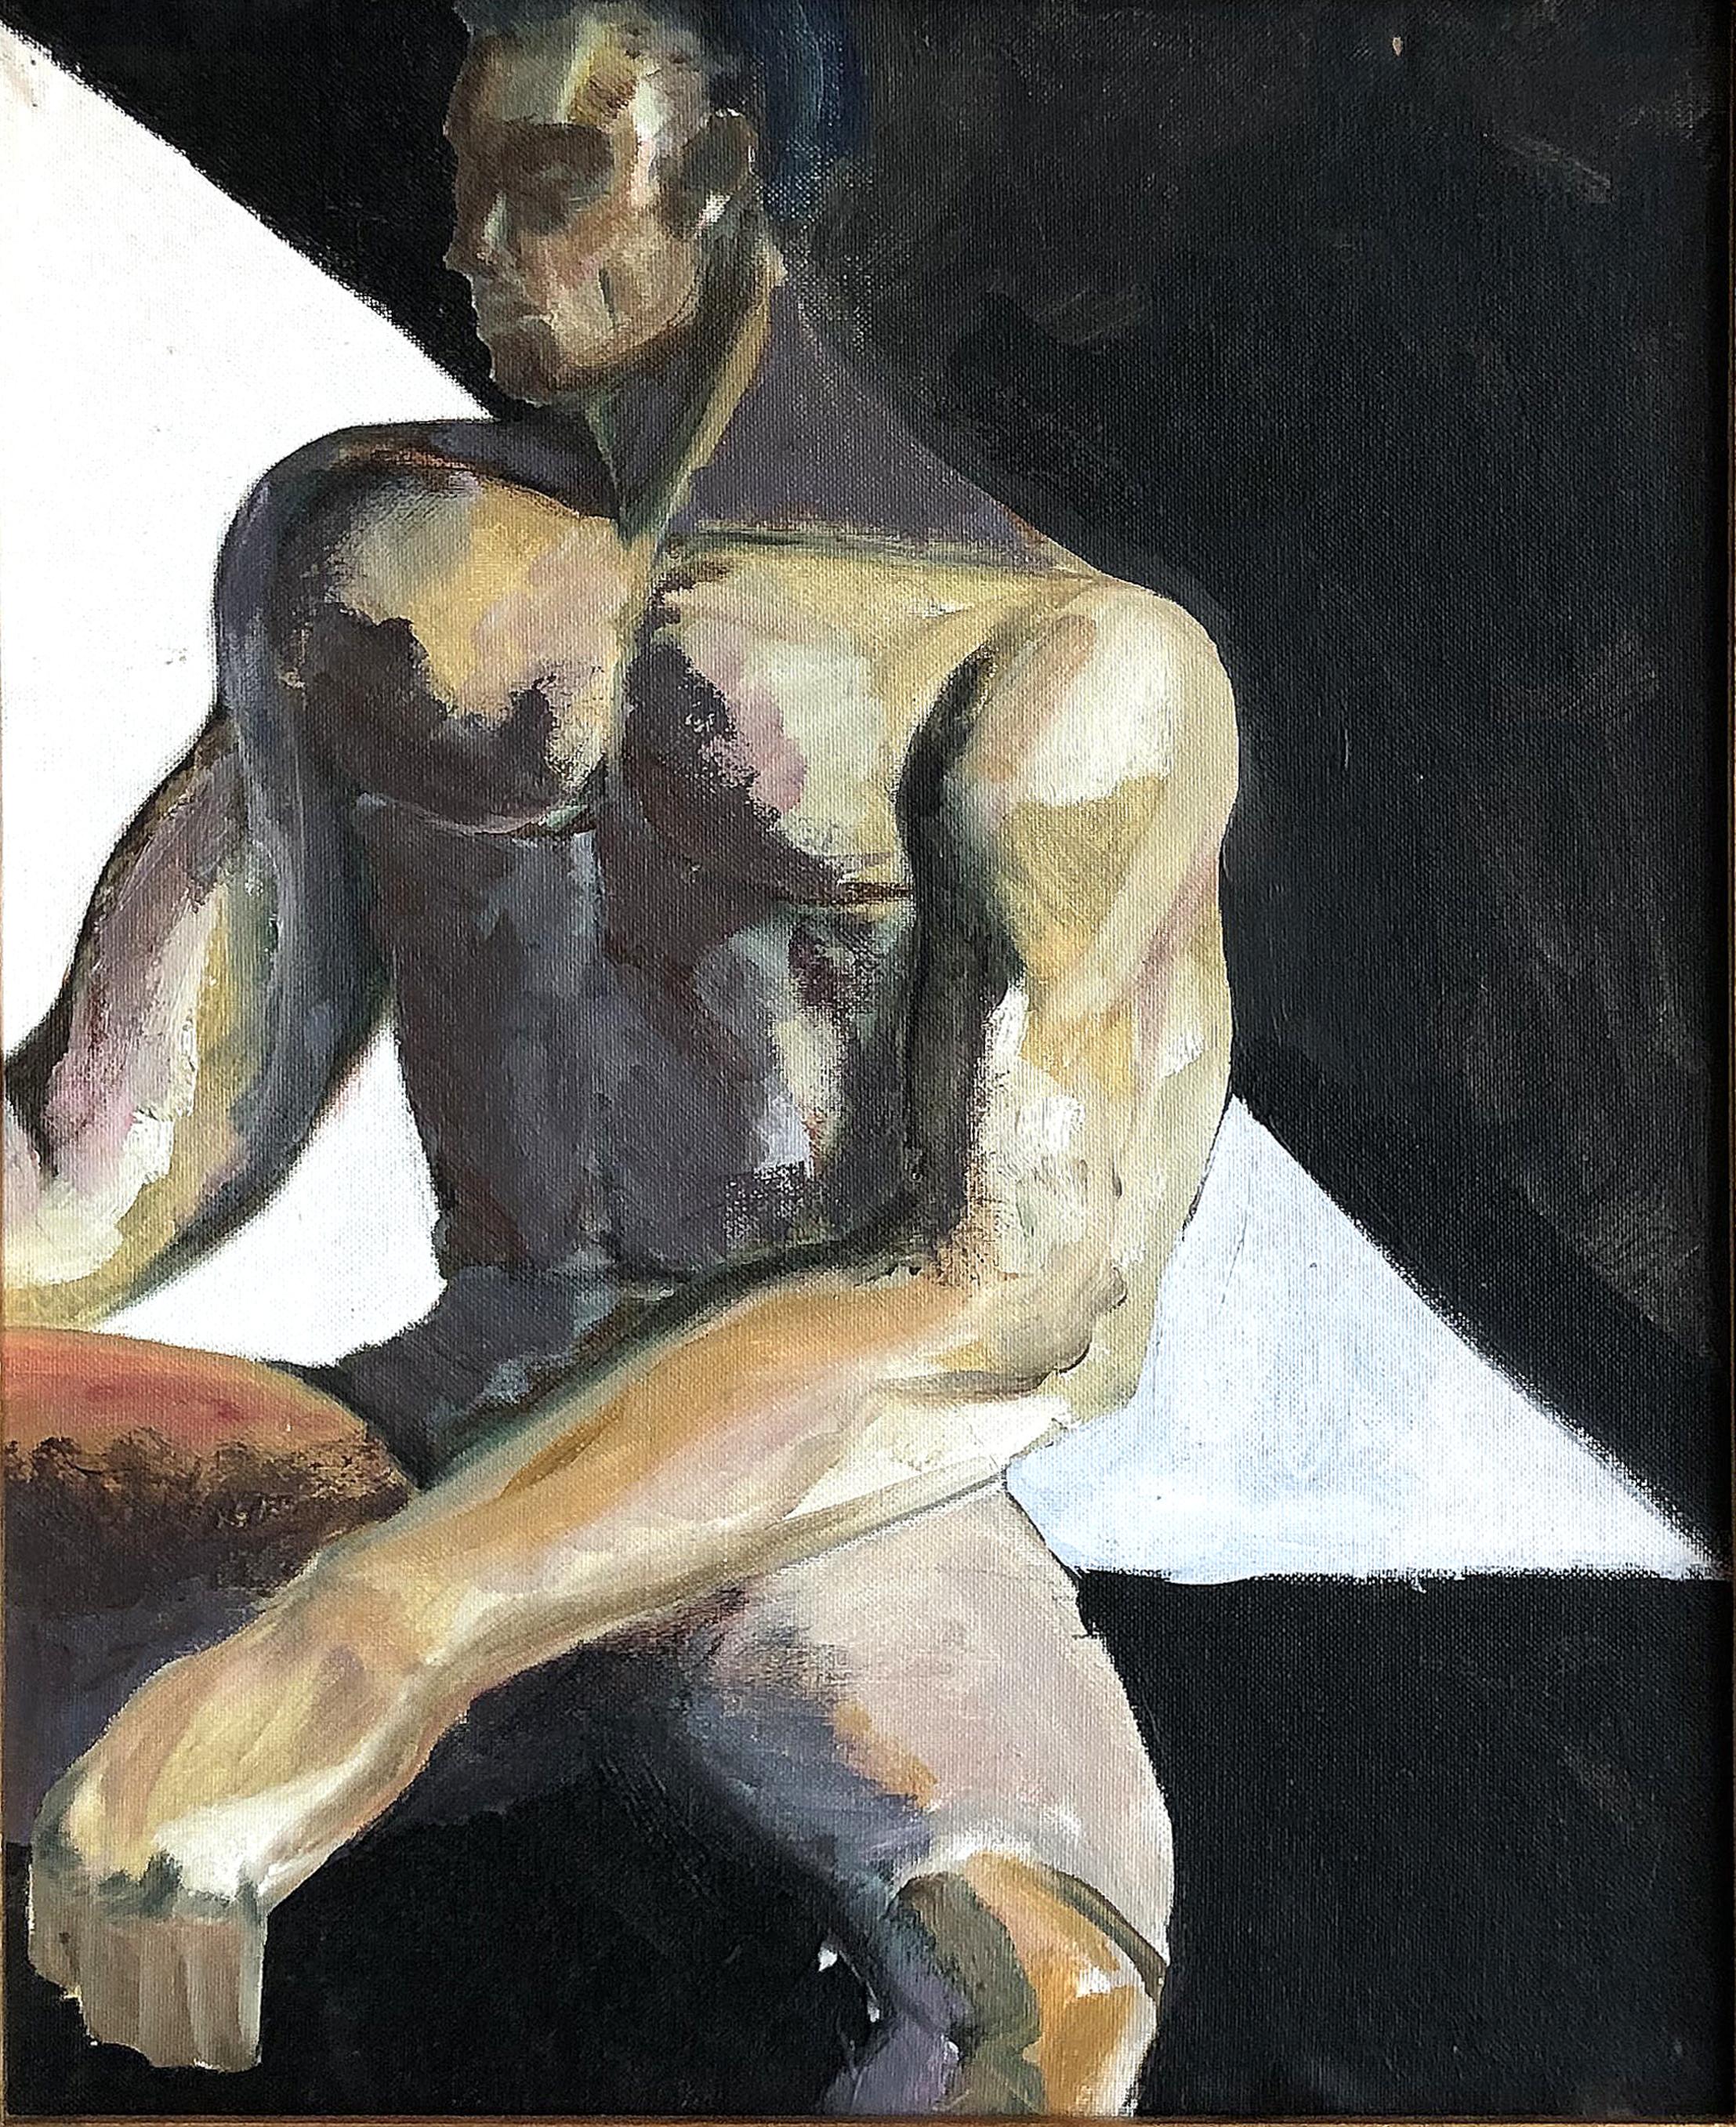 Vintage abstract male nude art study oil painting

Offered for sale is a vintage black male nude art study oil painting, circa 1970s. The abstract 'study was painted on artist board and encompasses the use of great composition. The artist works